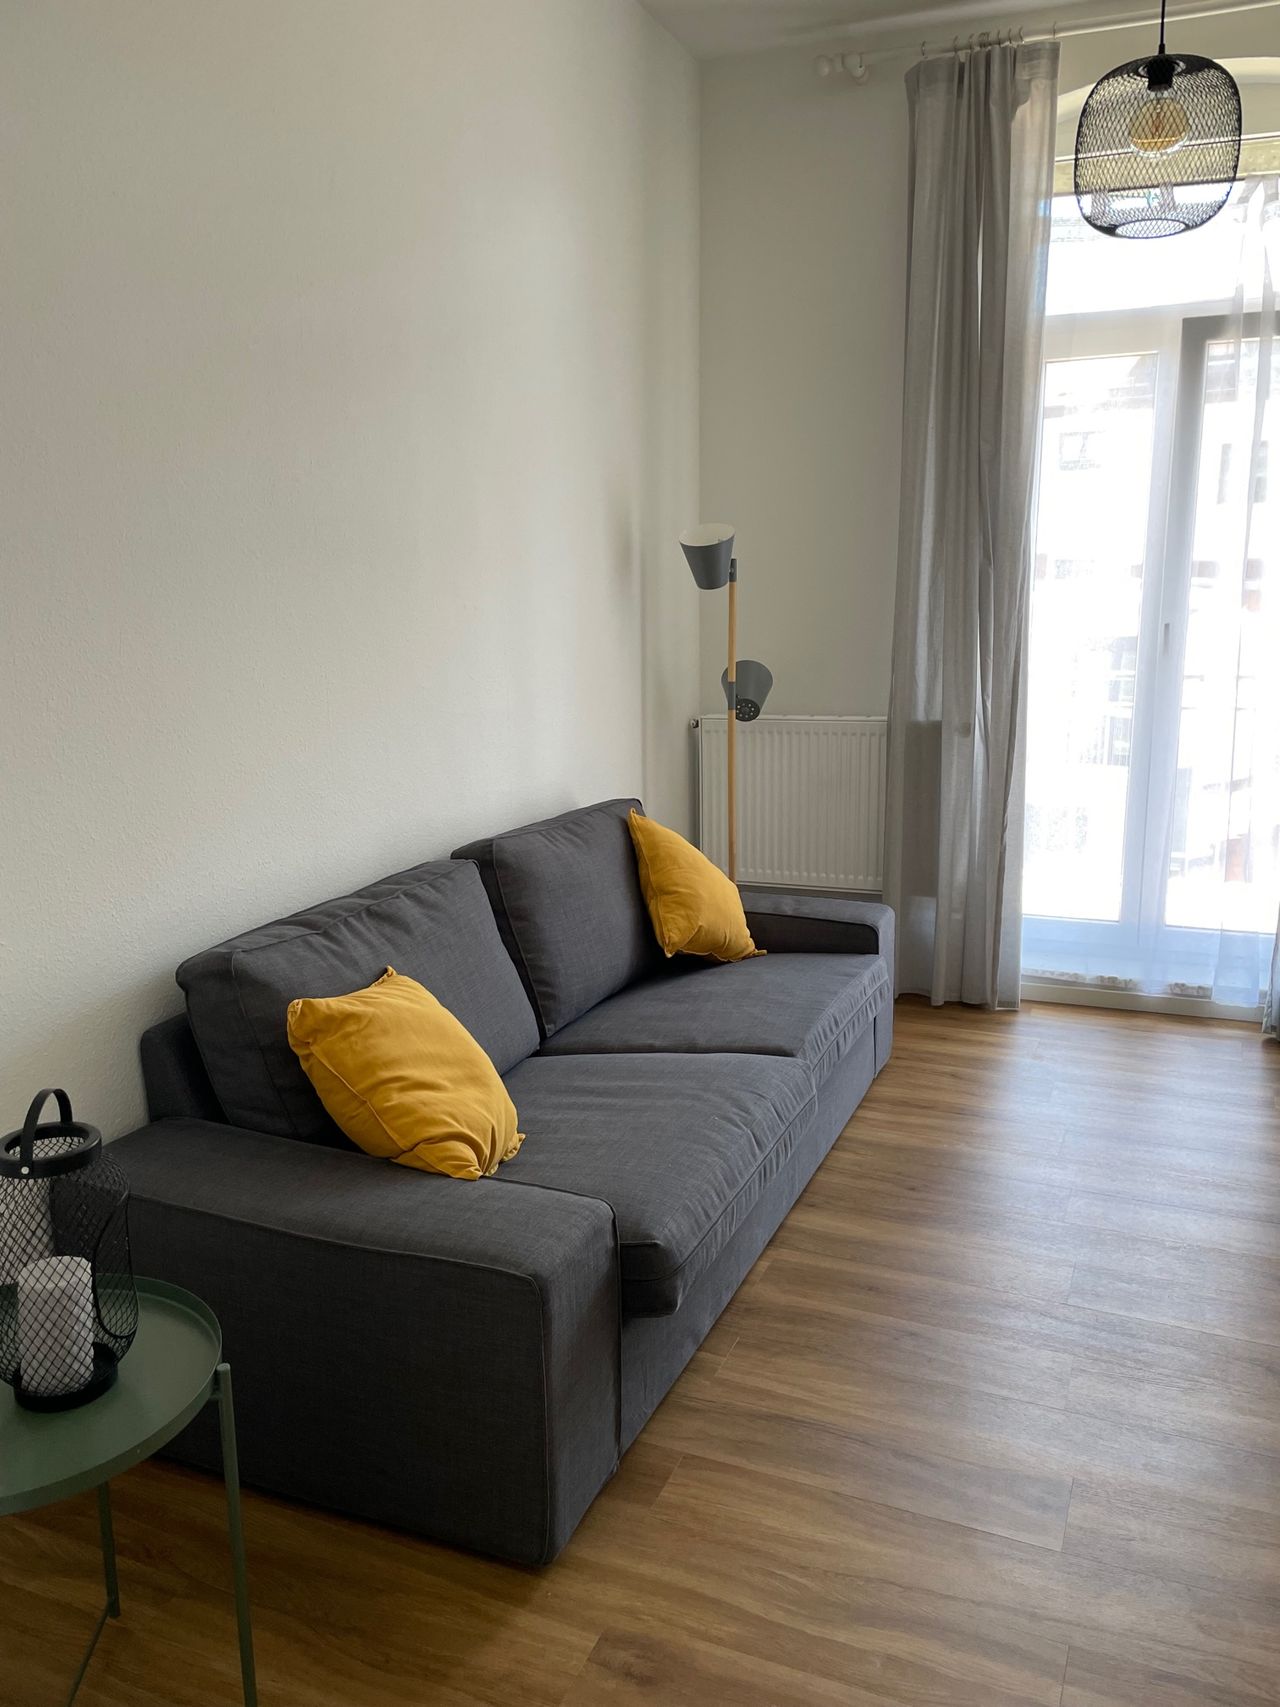 Renovated 3 room apartment in the center of the city